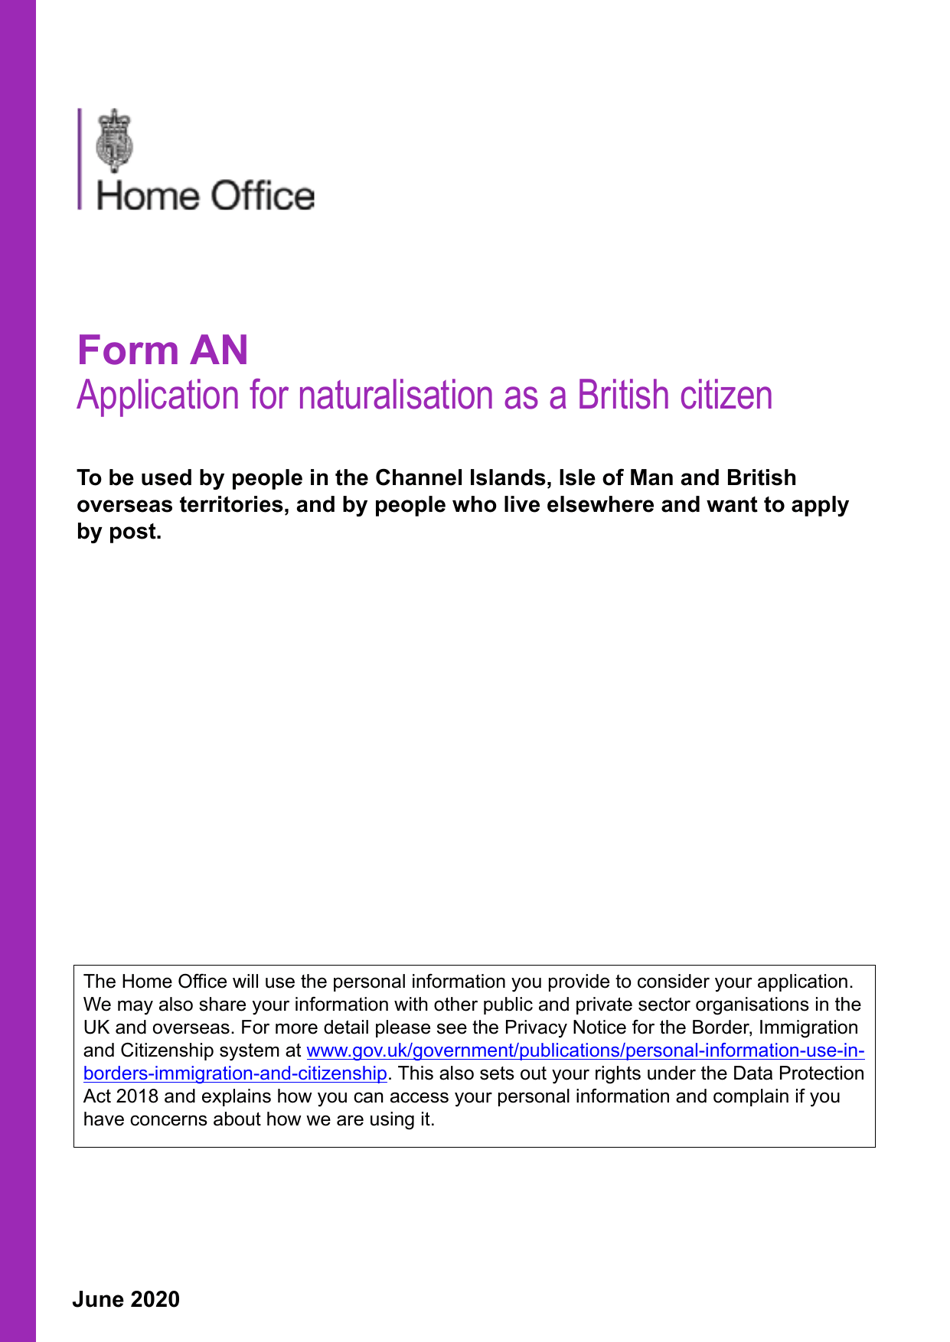 Form AN Application for Naturalisation as a British Citizen - United Kingdom, Page 1